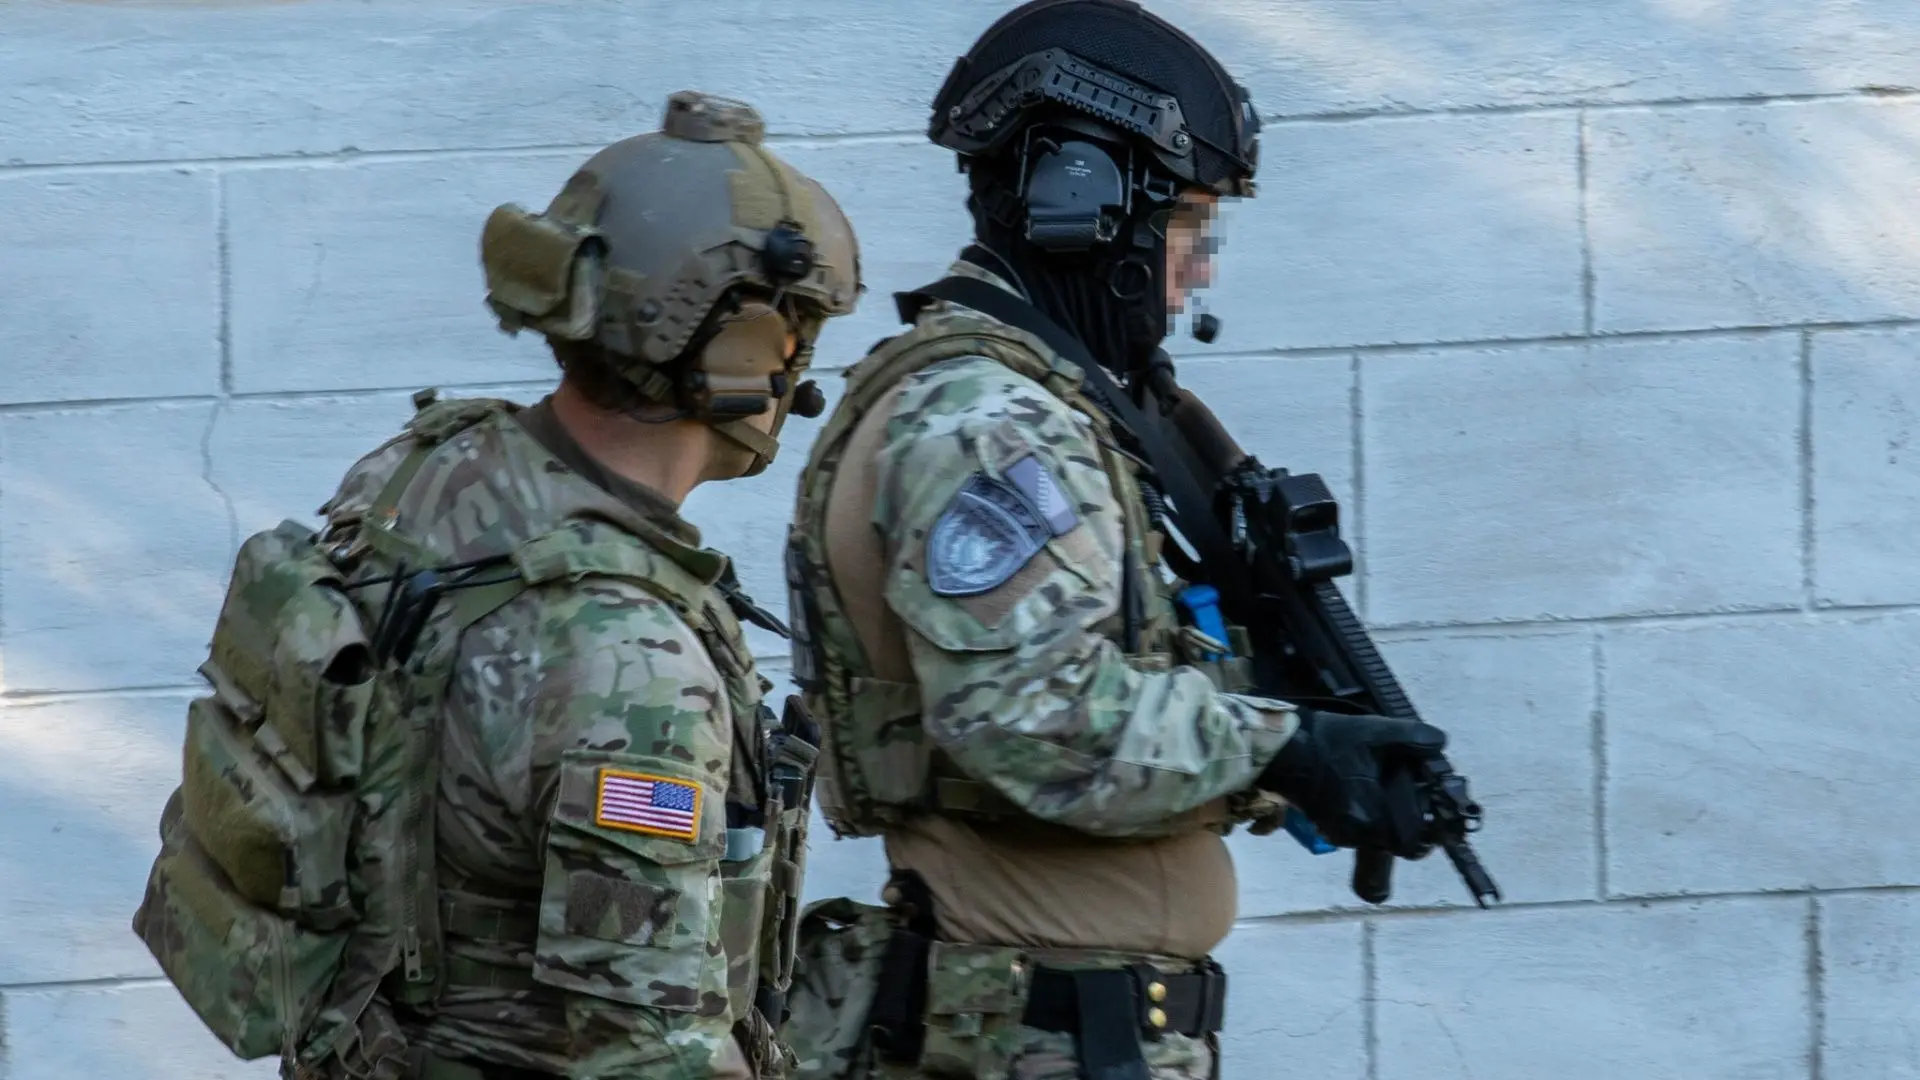 The operator from the SIPA SSU stands alongside his colleague from the US Special Forces